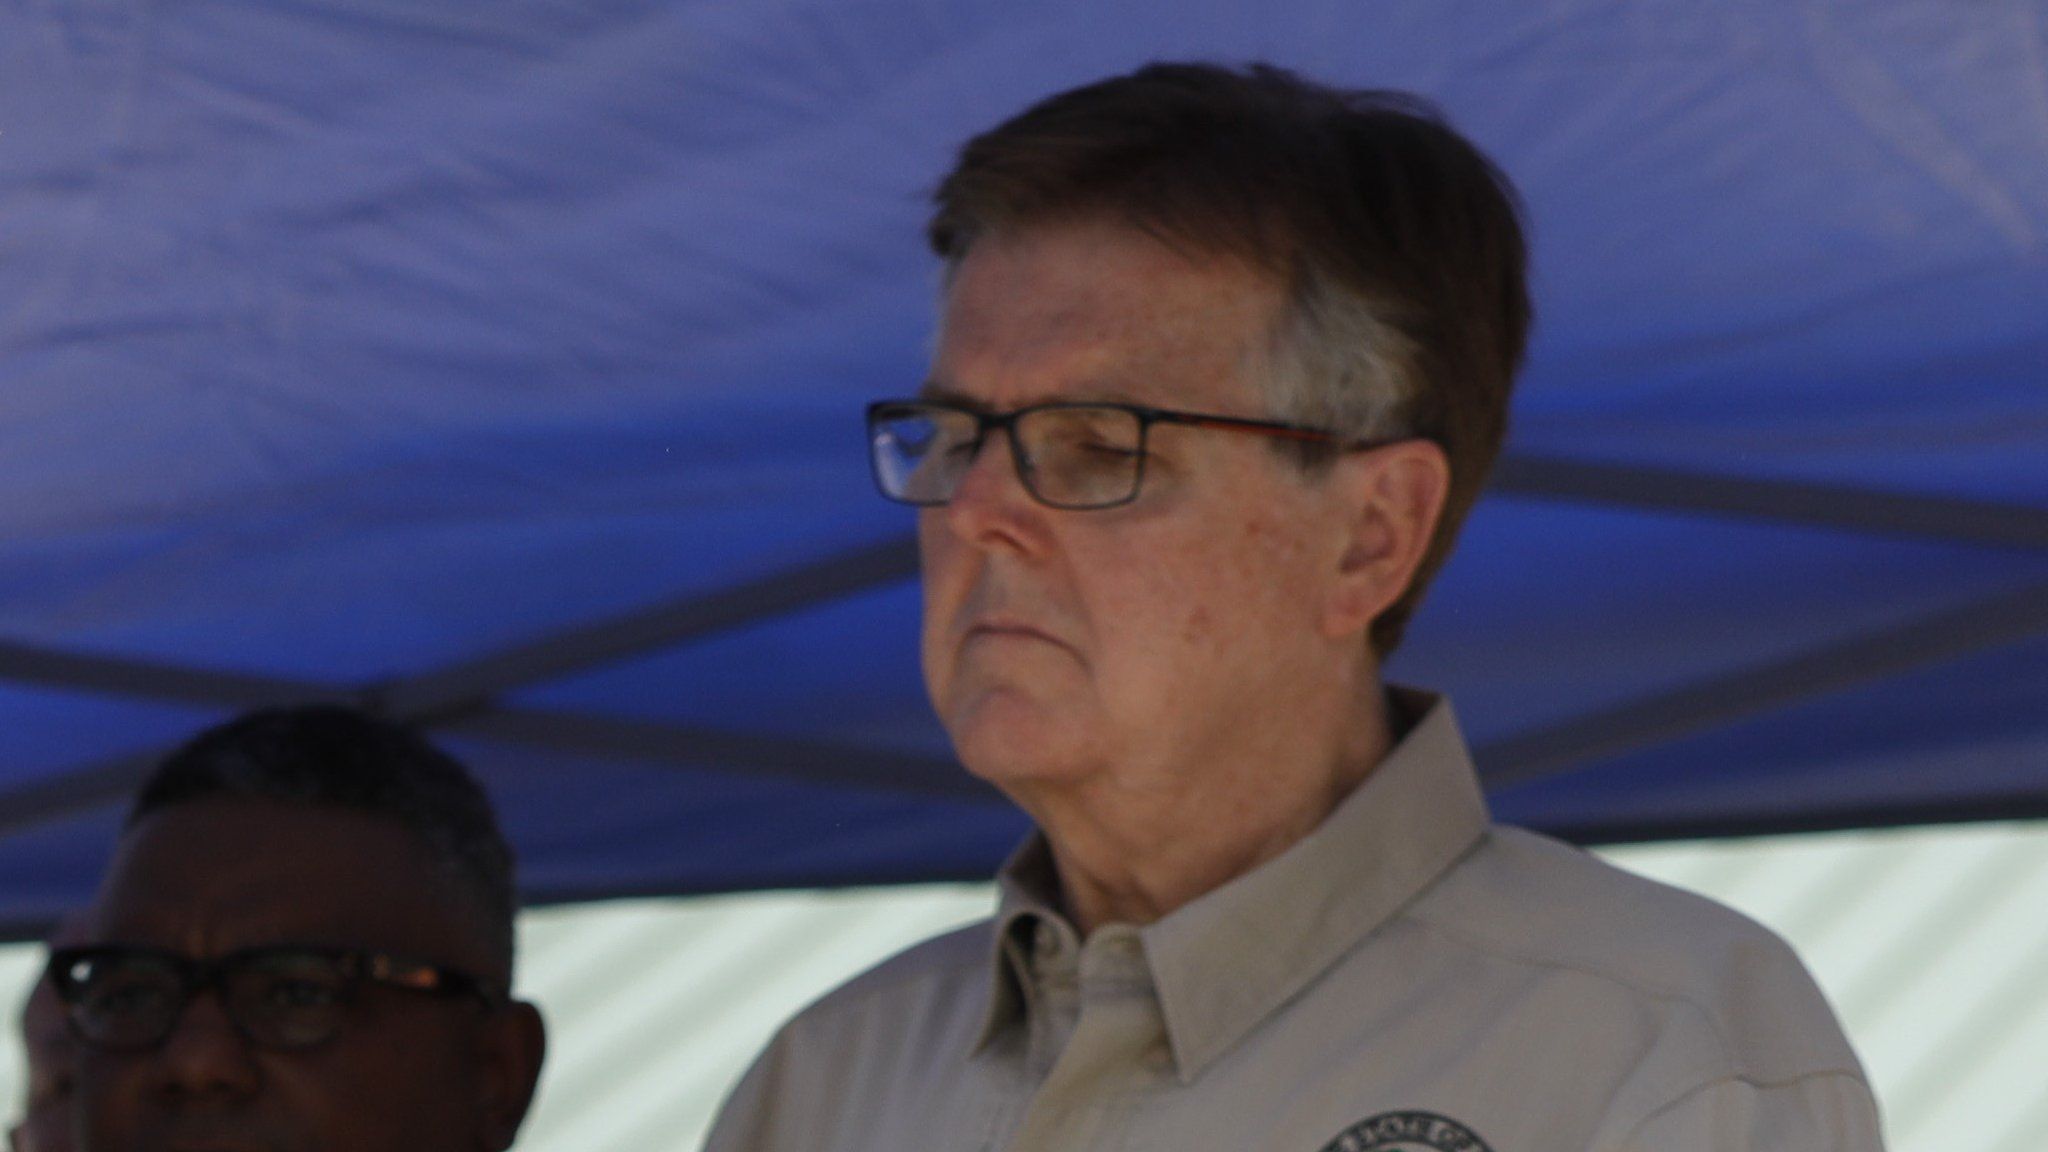 Dan Patrick at the news conference after the shooting on 18 May 2018